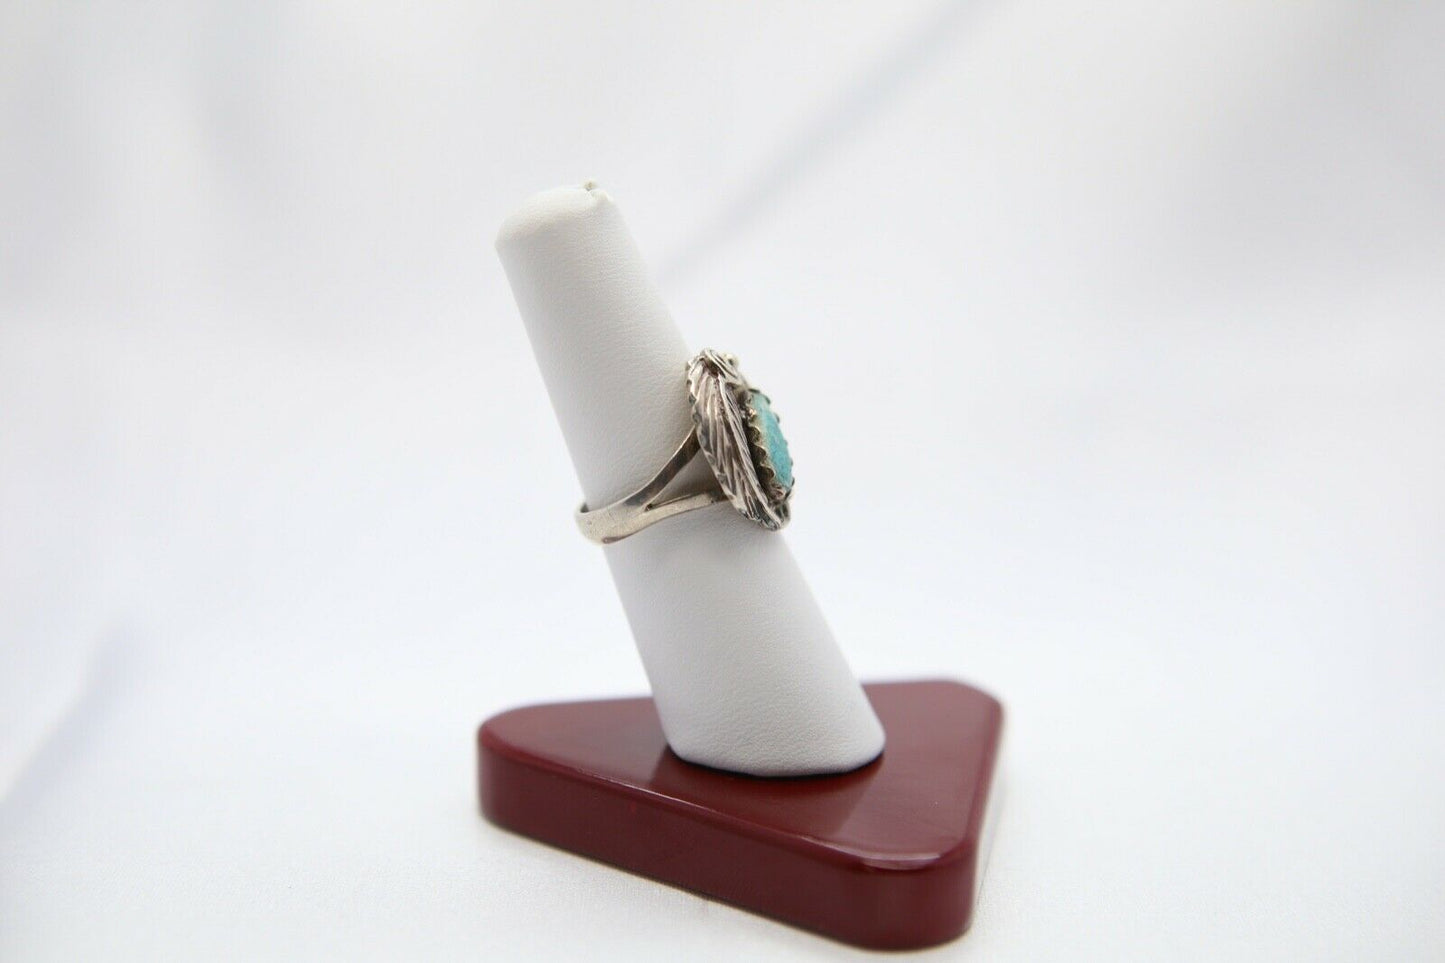 Sterling Silver Feather Ring with Turquoise, Size 7.75 - 5.5g